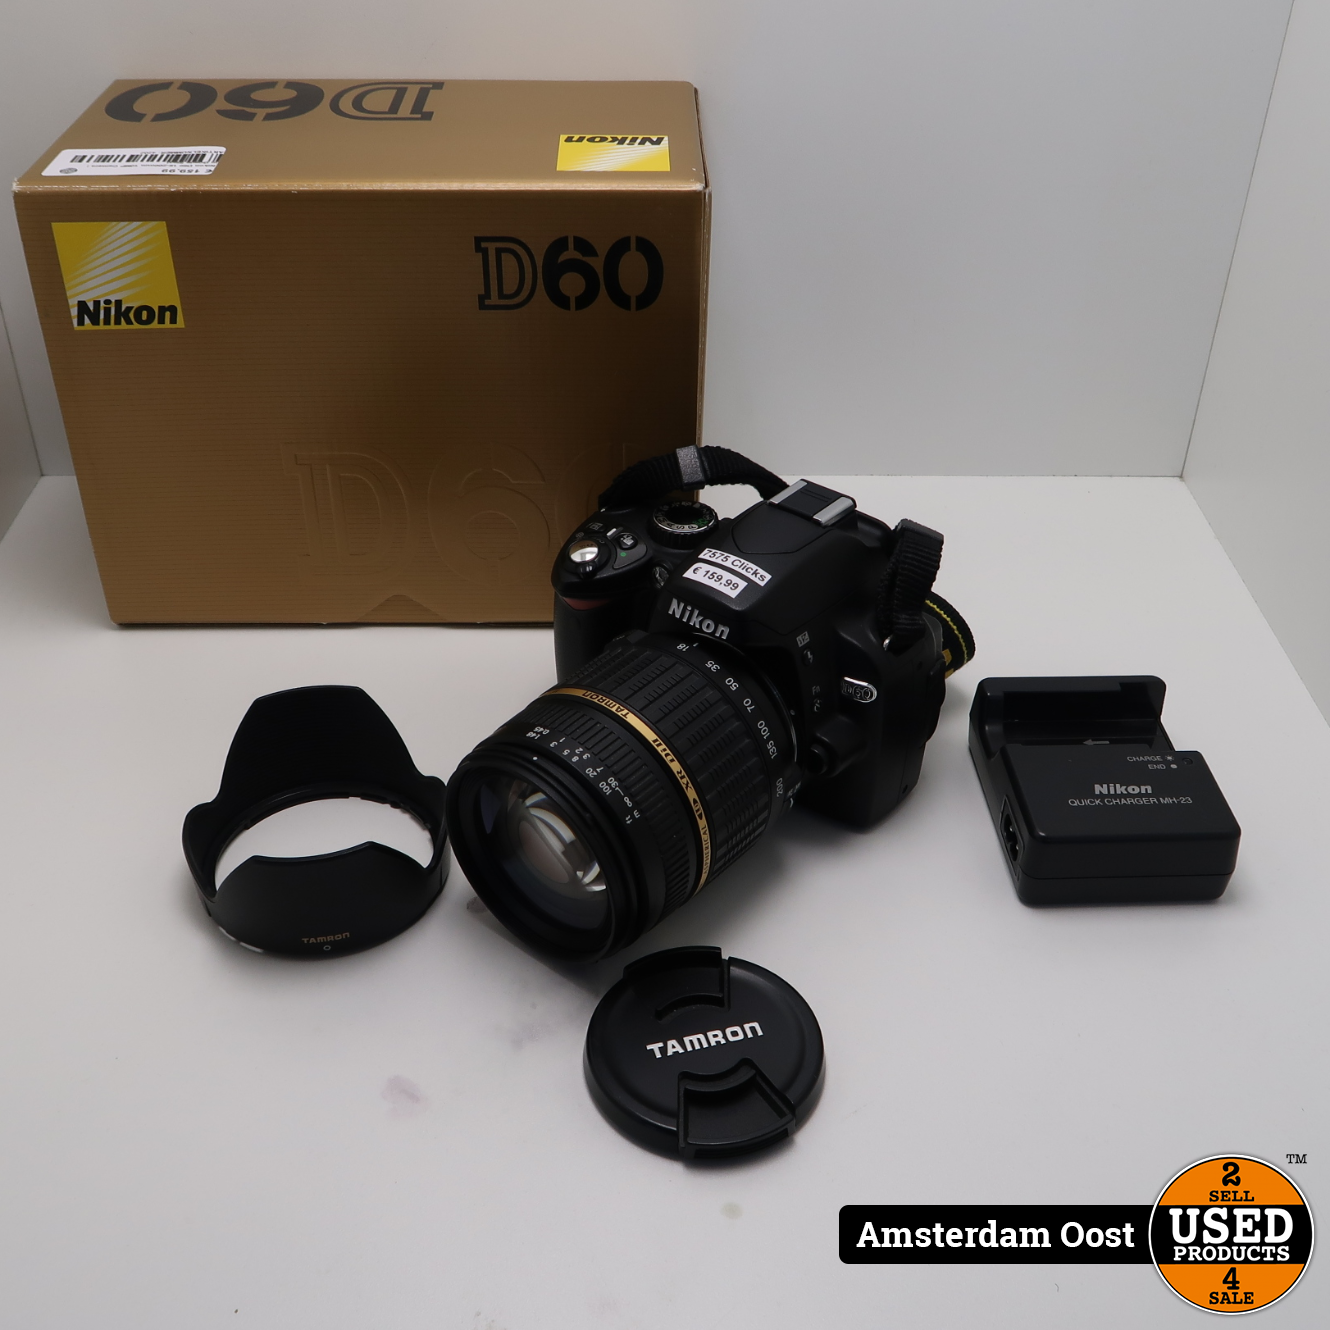 Nikon D60 10MP Camera | in Goede Staat - Used Products Amsterdam Oost